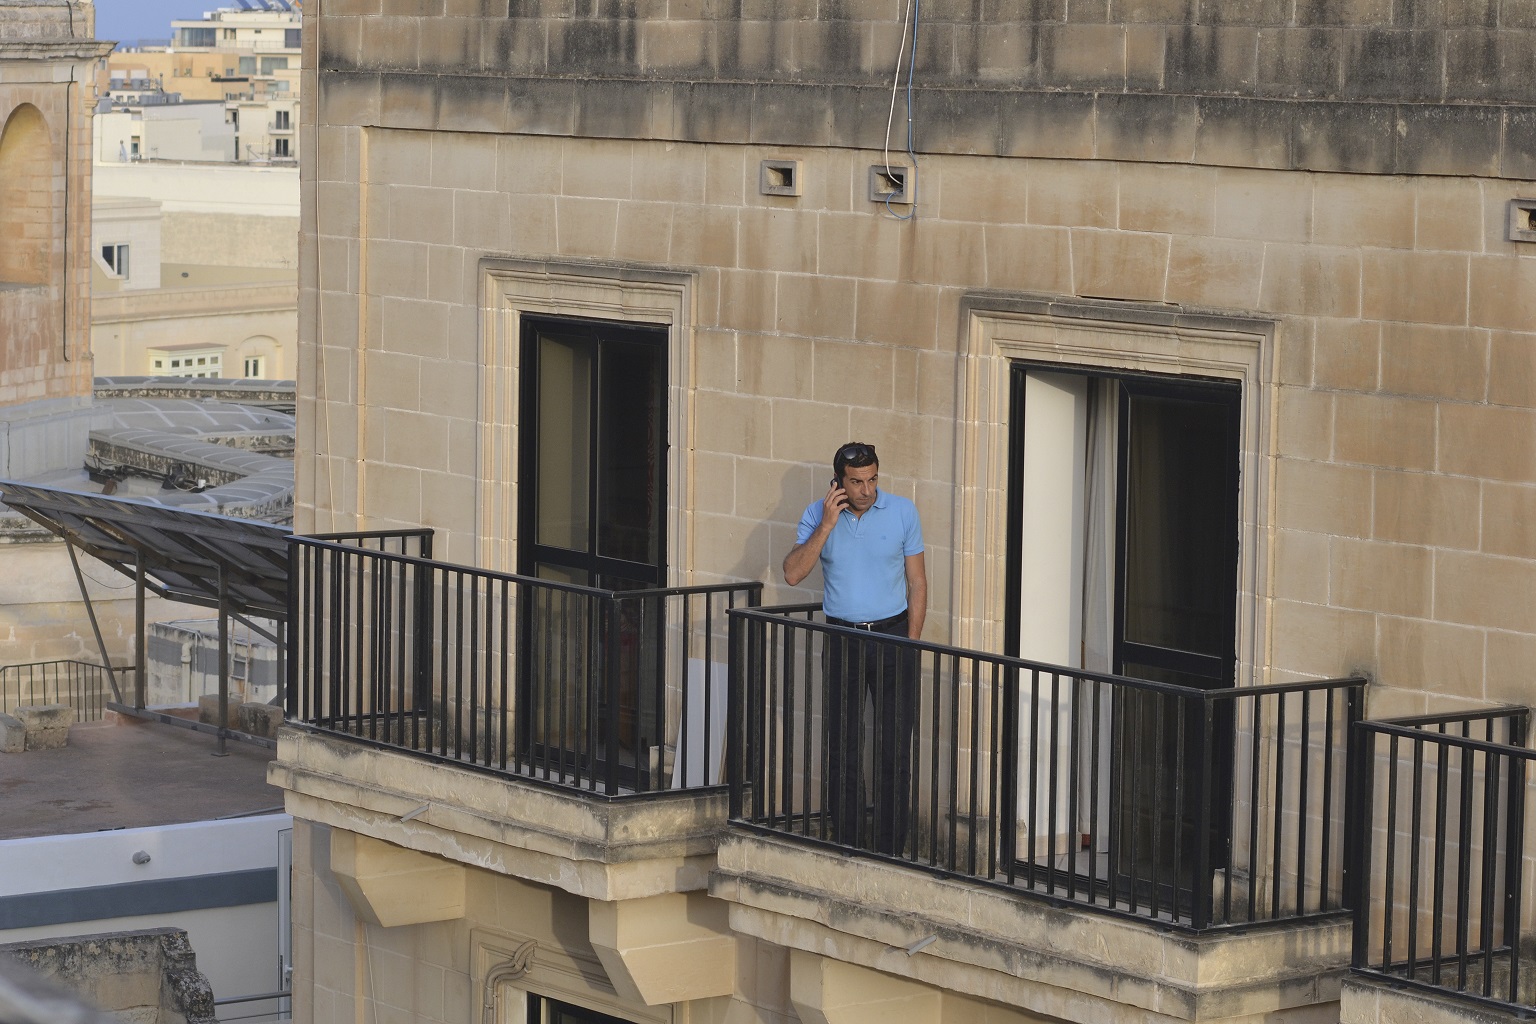 6.15pm - a police officer standing on the flat's balcony makes a call